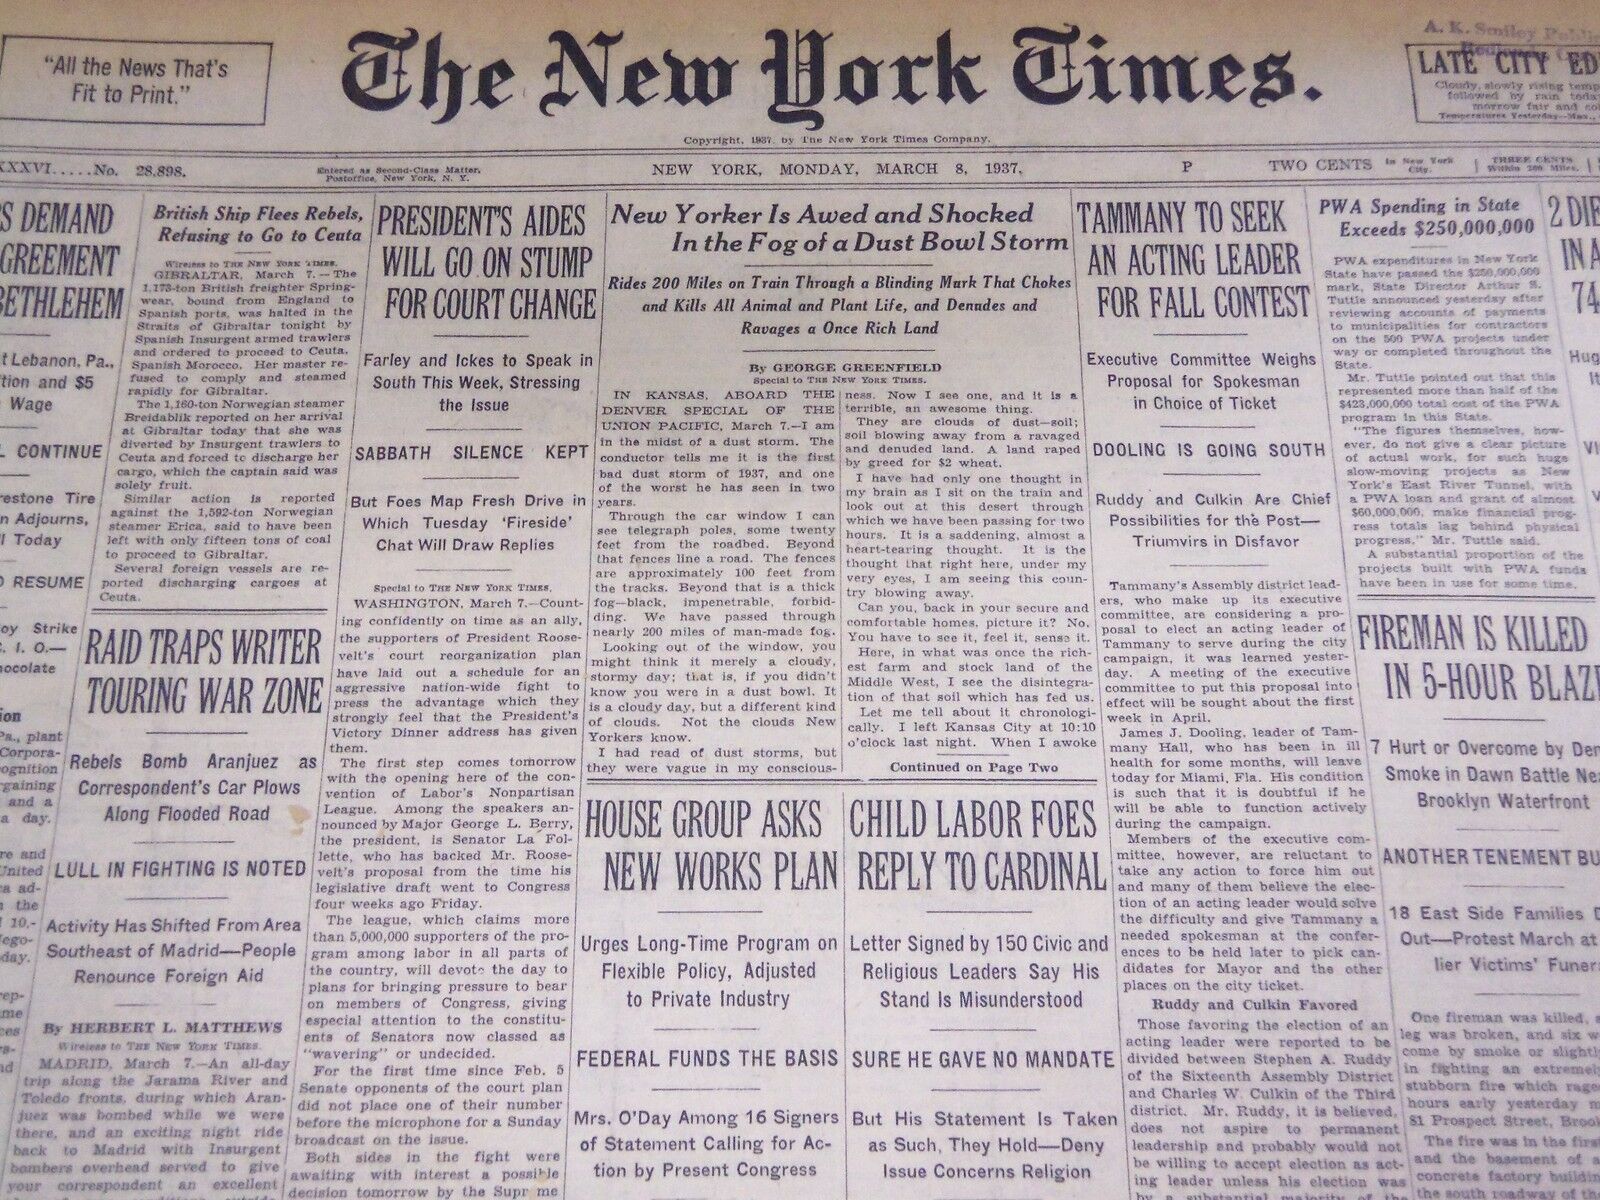 1937 MARCH 8 NEW YORK TIMES - DUST BOWL AWE AND SHOCK - NT 3399